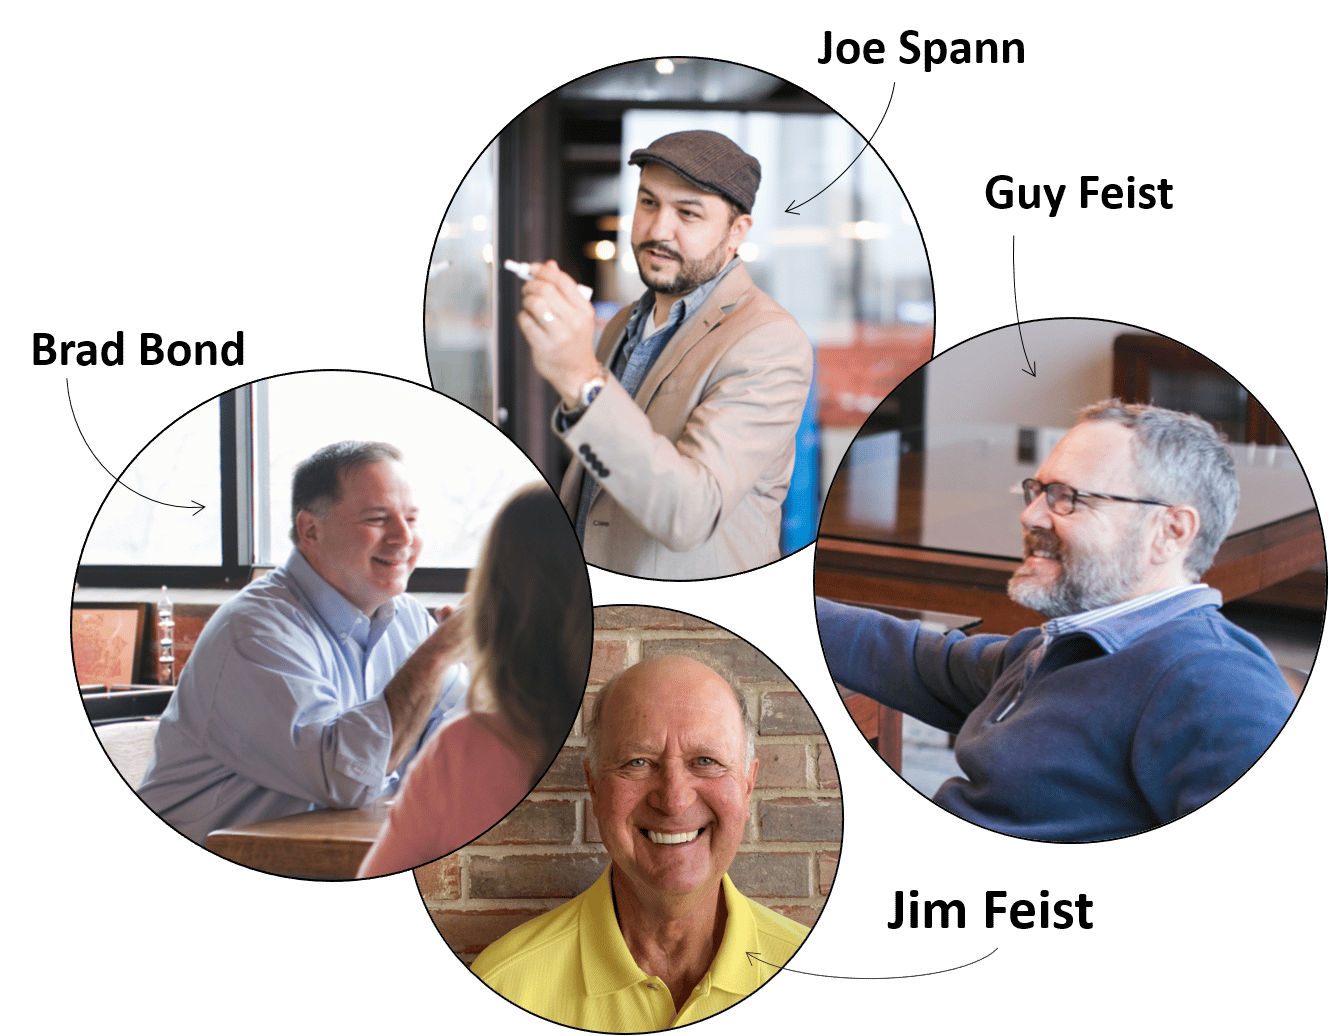 Joe Spann, Brad Bond, Guy Feist, and Mr. Jim Feist are the founders of Fifth Avenue Healthcare Services